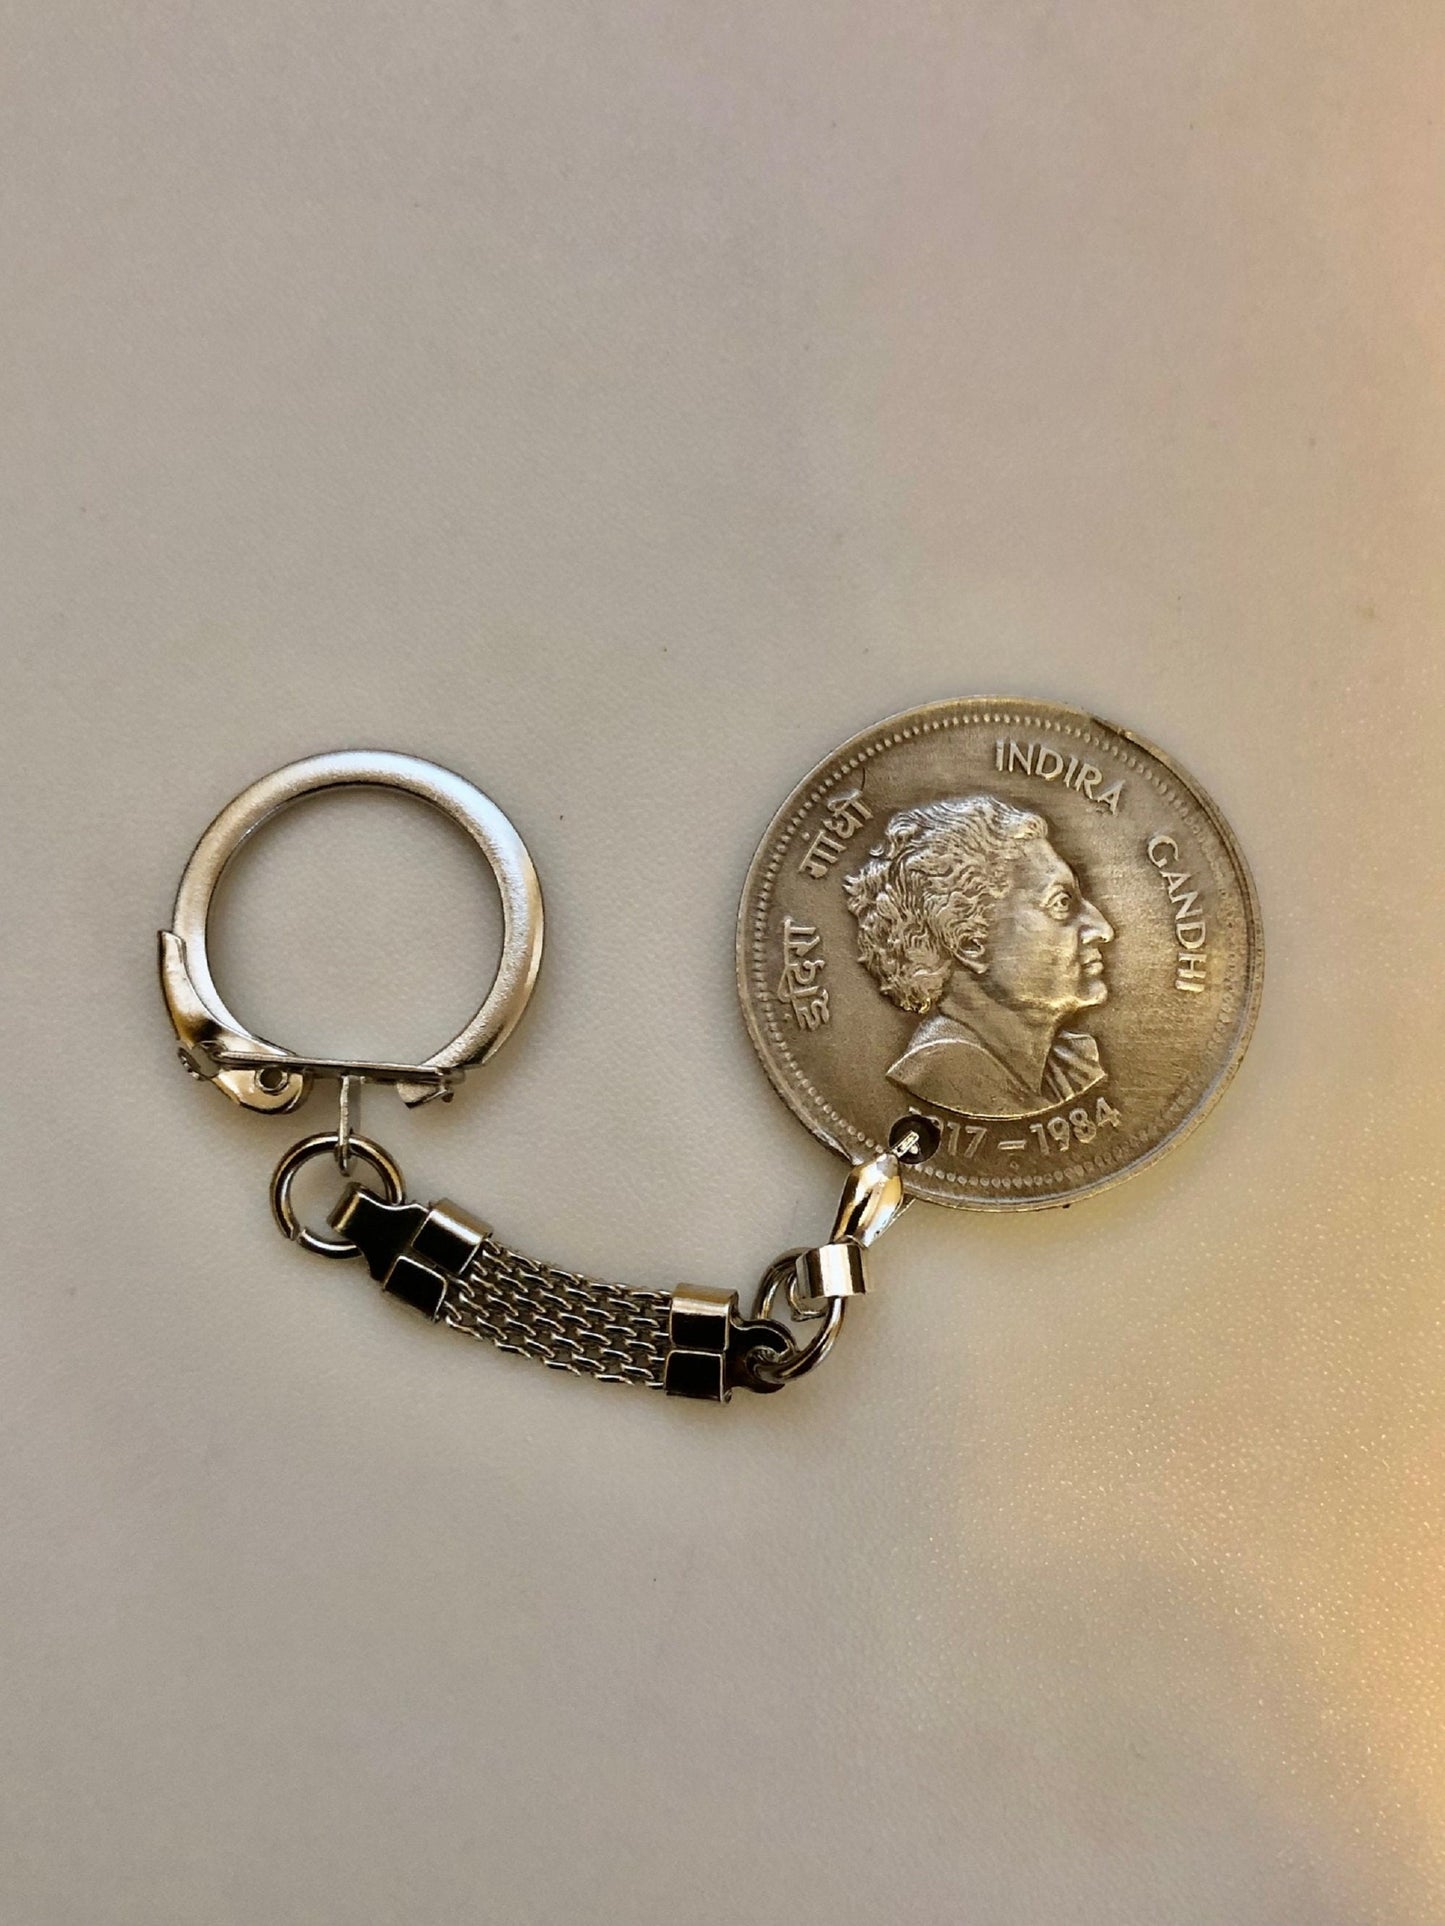 India Coin Keychain Indian 5 Rupees Rare Find Vintage Antique Finished By Hand Personal & Limited Supply -